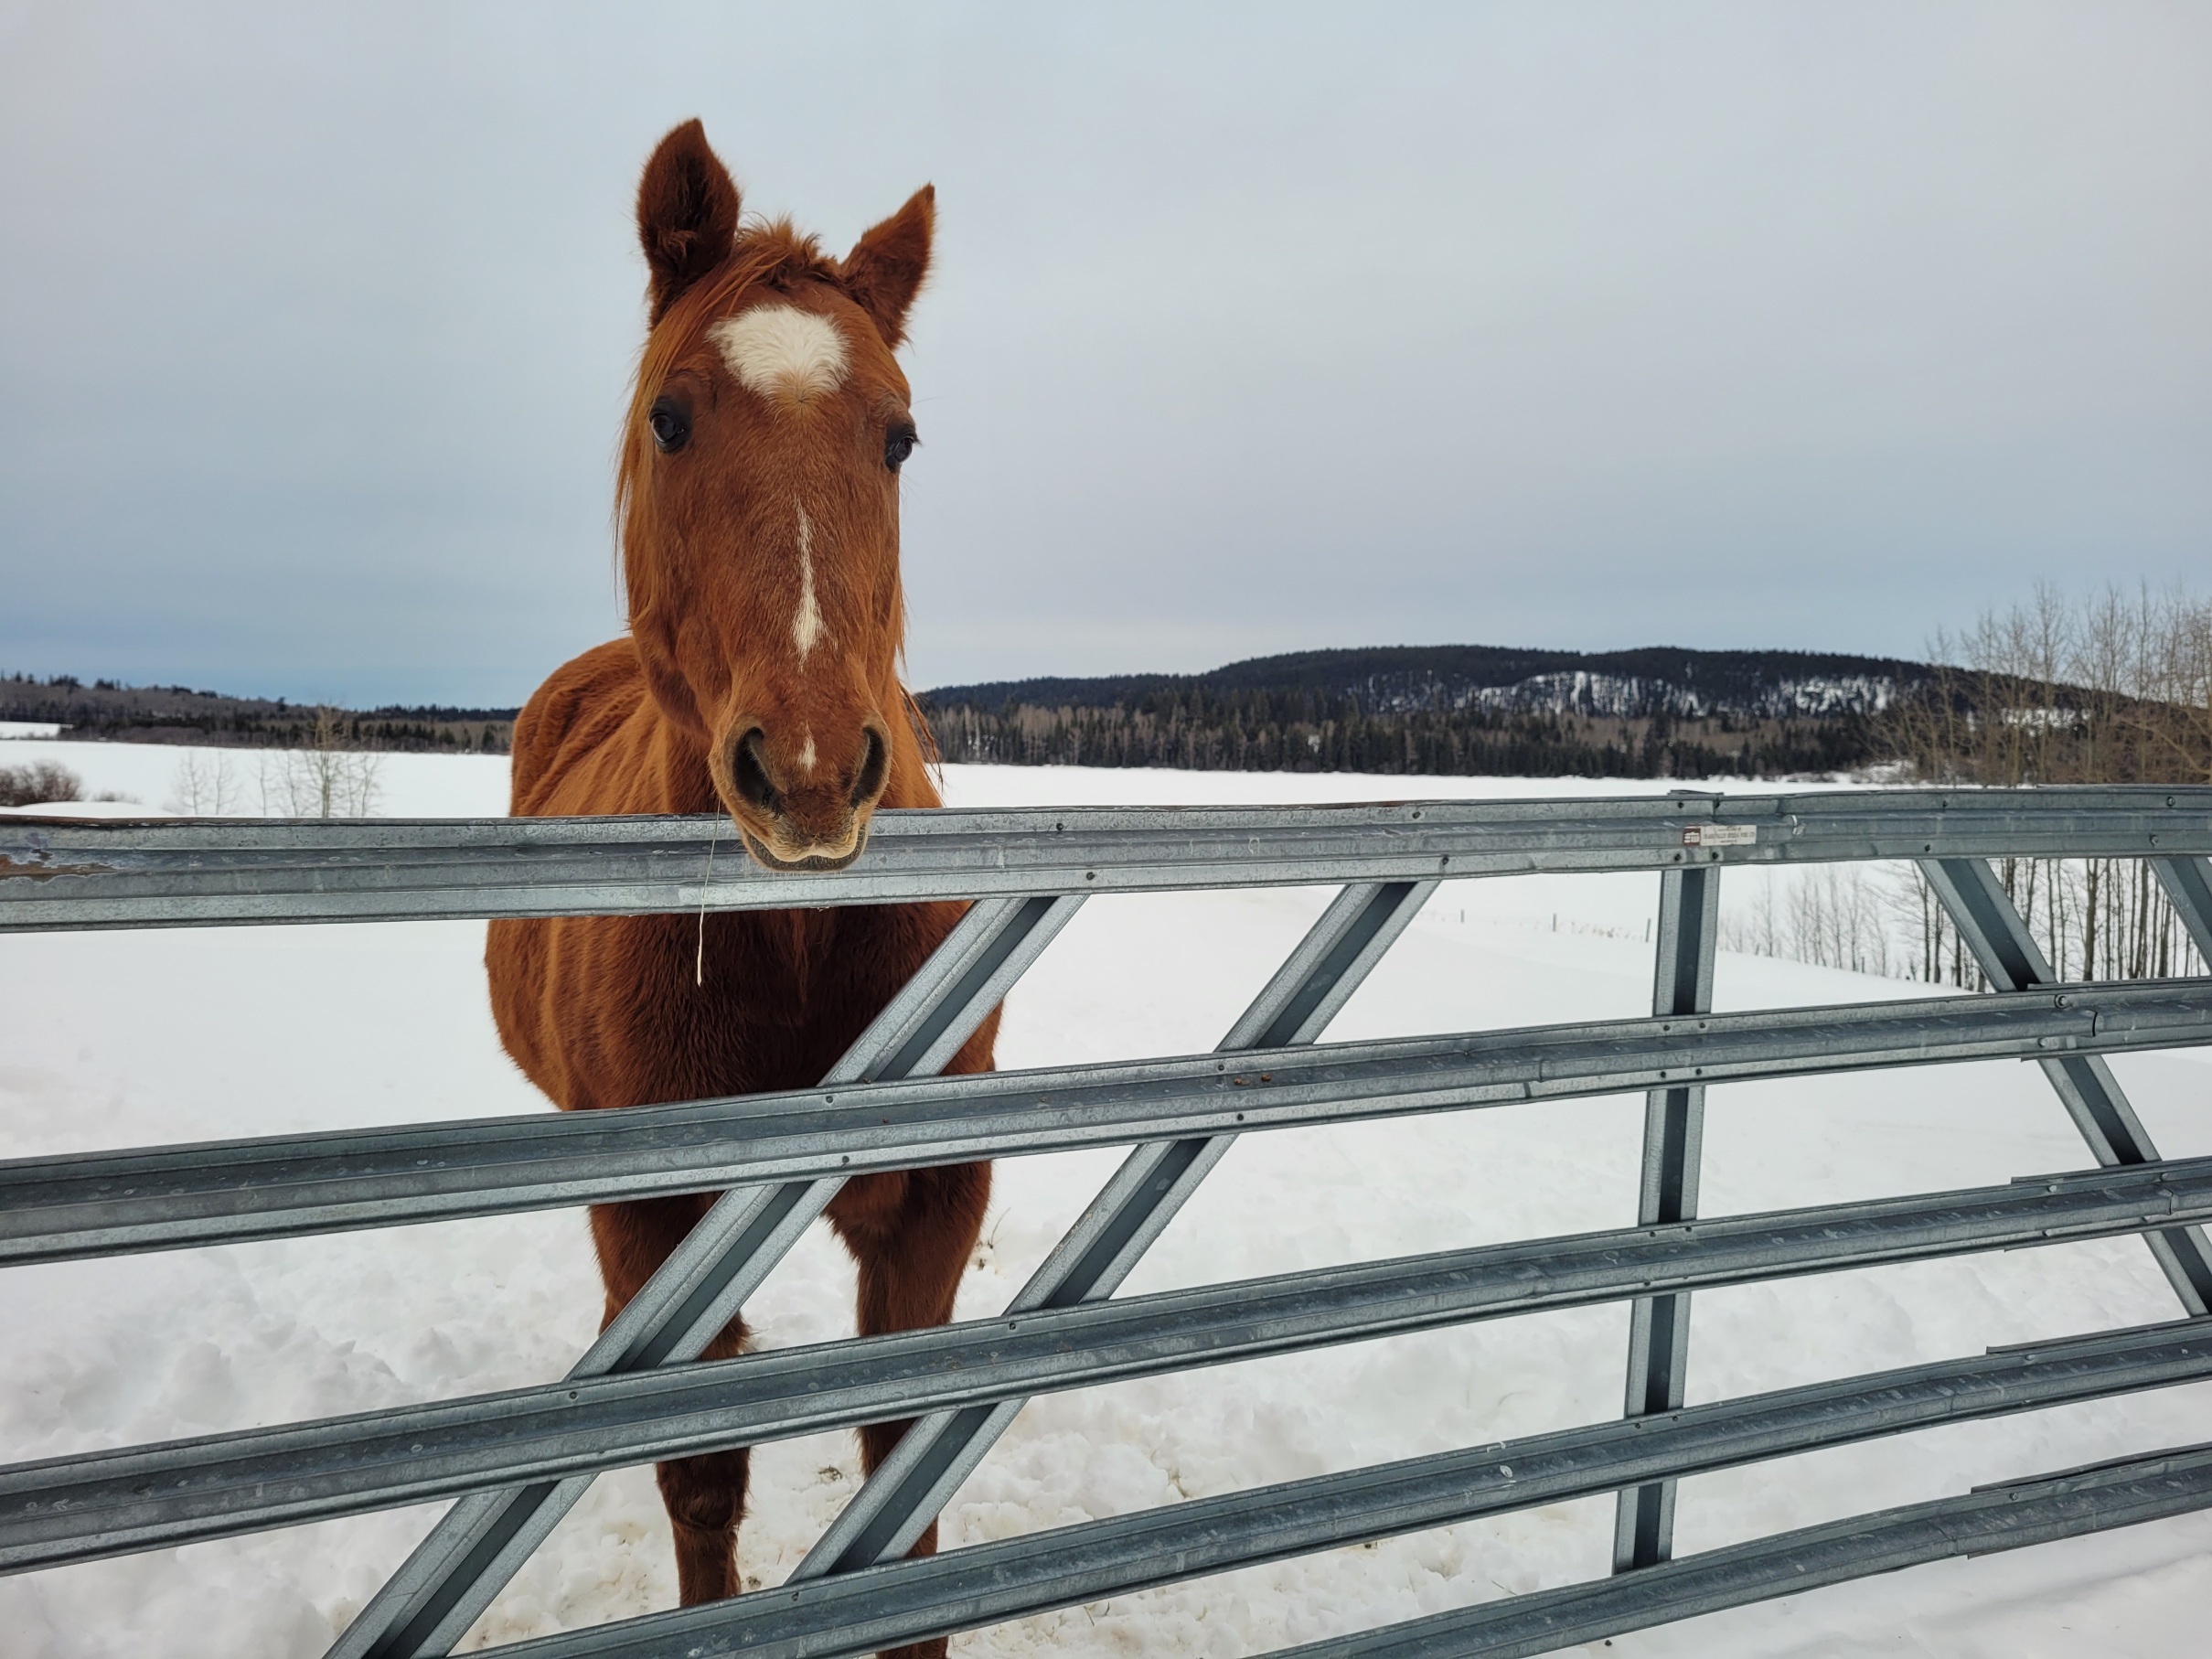 photo of a chestnut quarter horse in a snowy field, looking over a metal gate